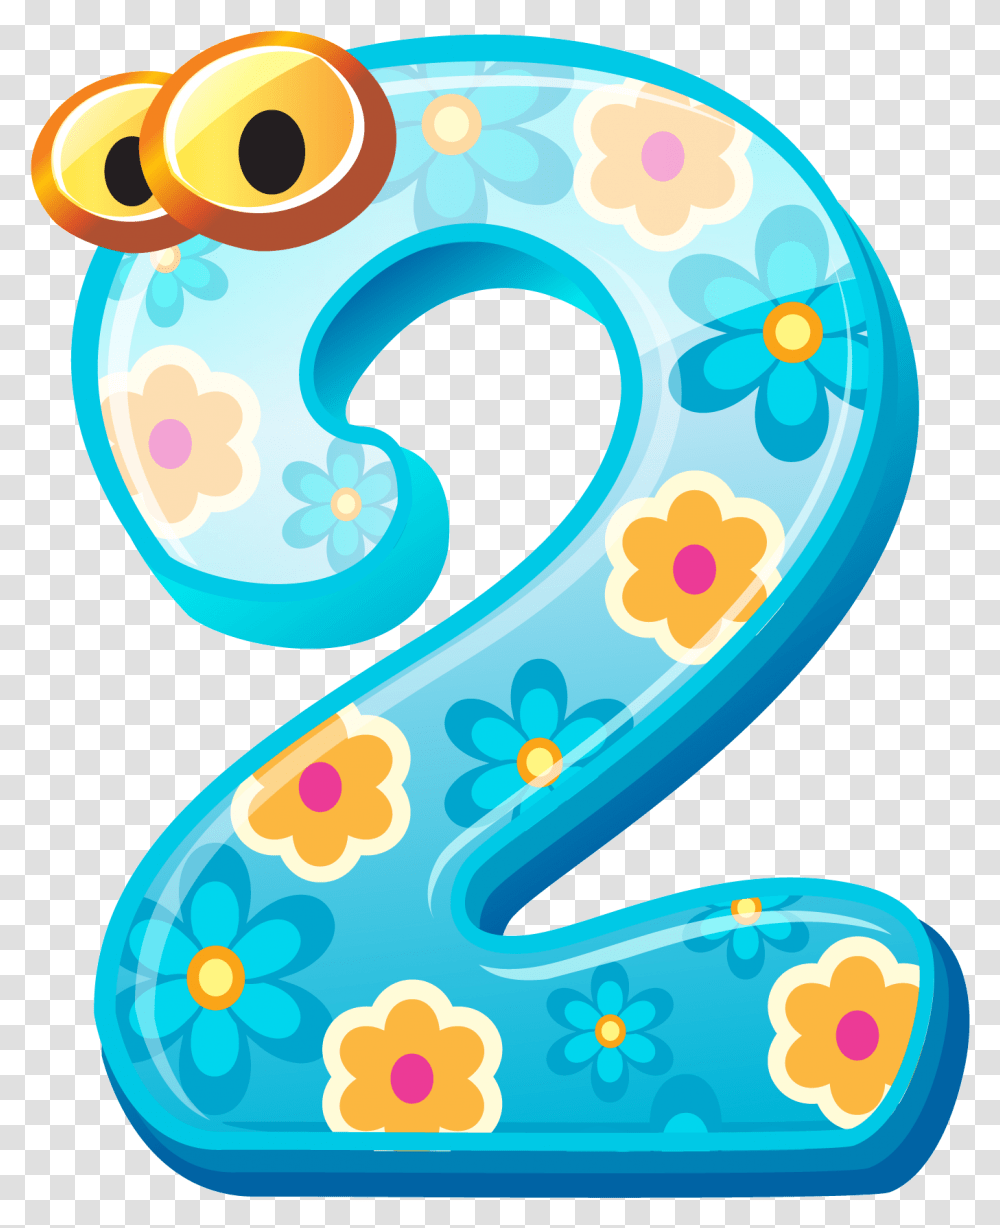 Numbers Cute Number Two Clipart Image Gallery High Cute Number 2 Clipart, Icing, Cream Transparent Png